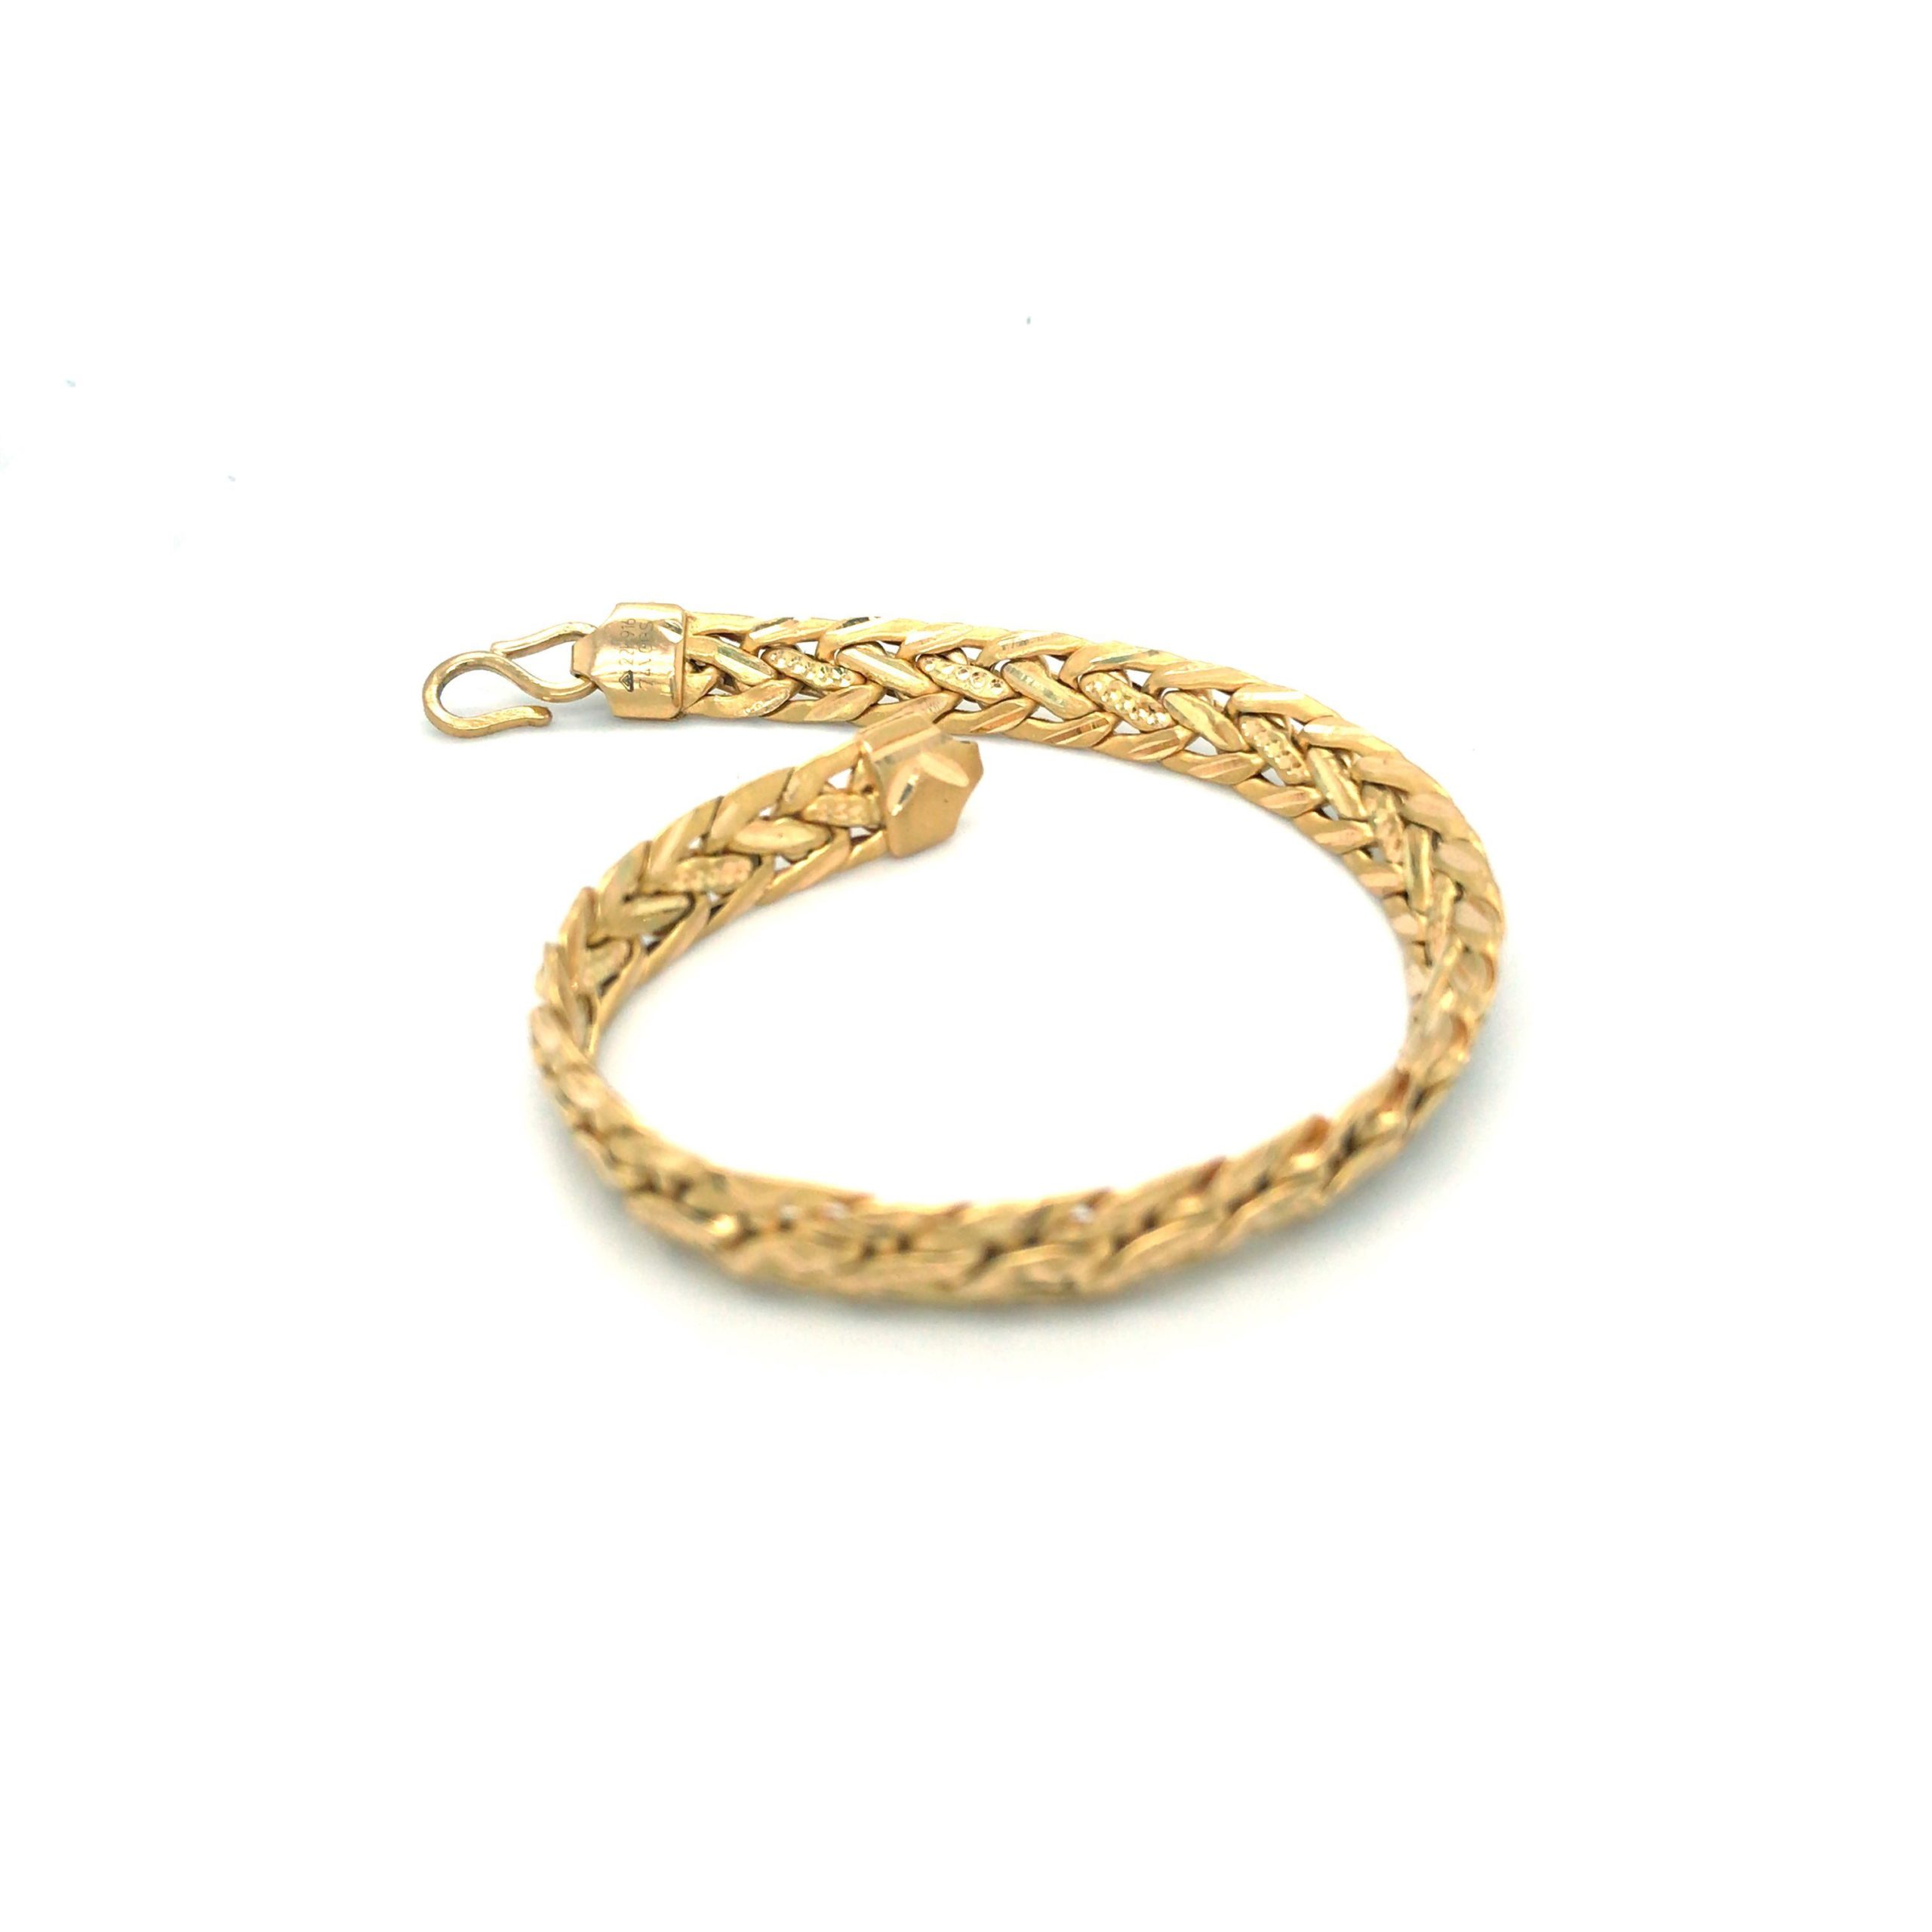 22 kt 92.00 GM Handmade Gold Bangles | Indian Gold Jewelry